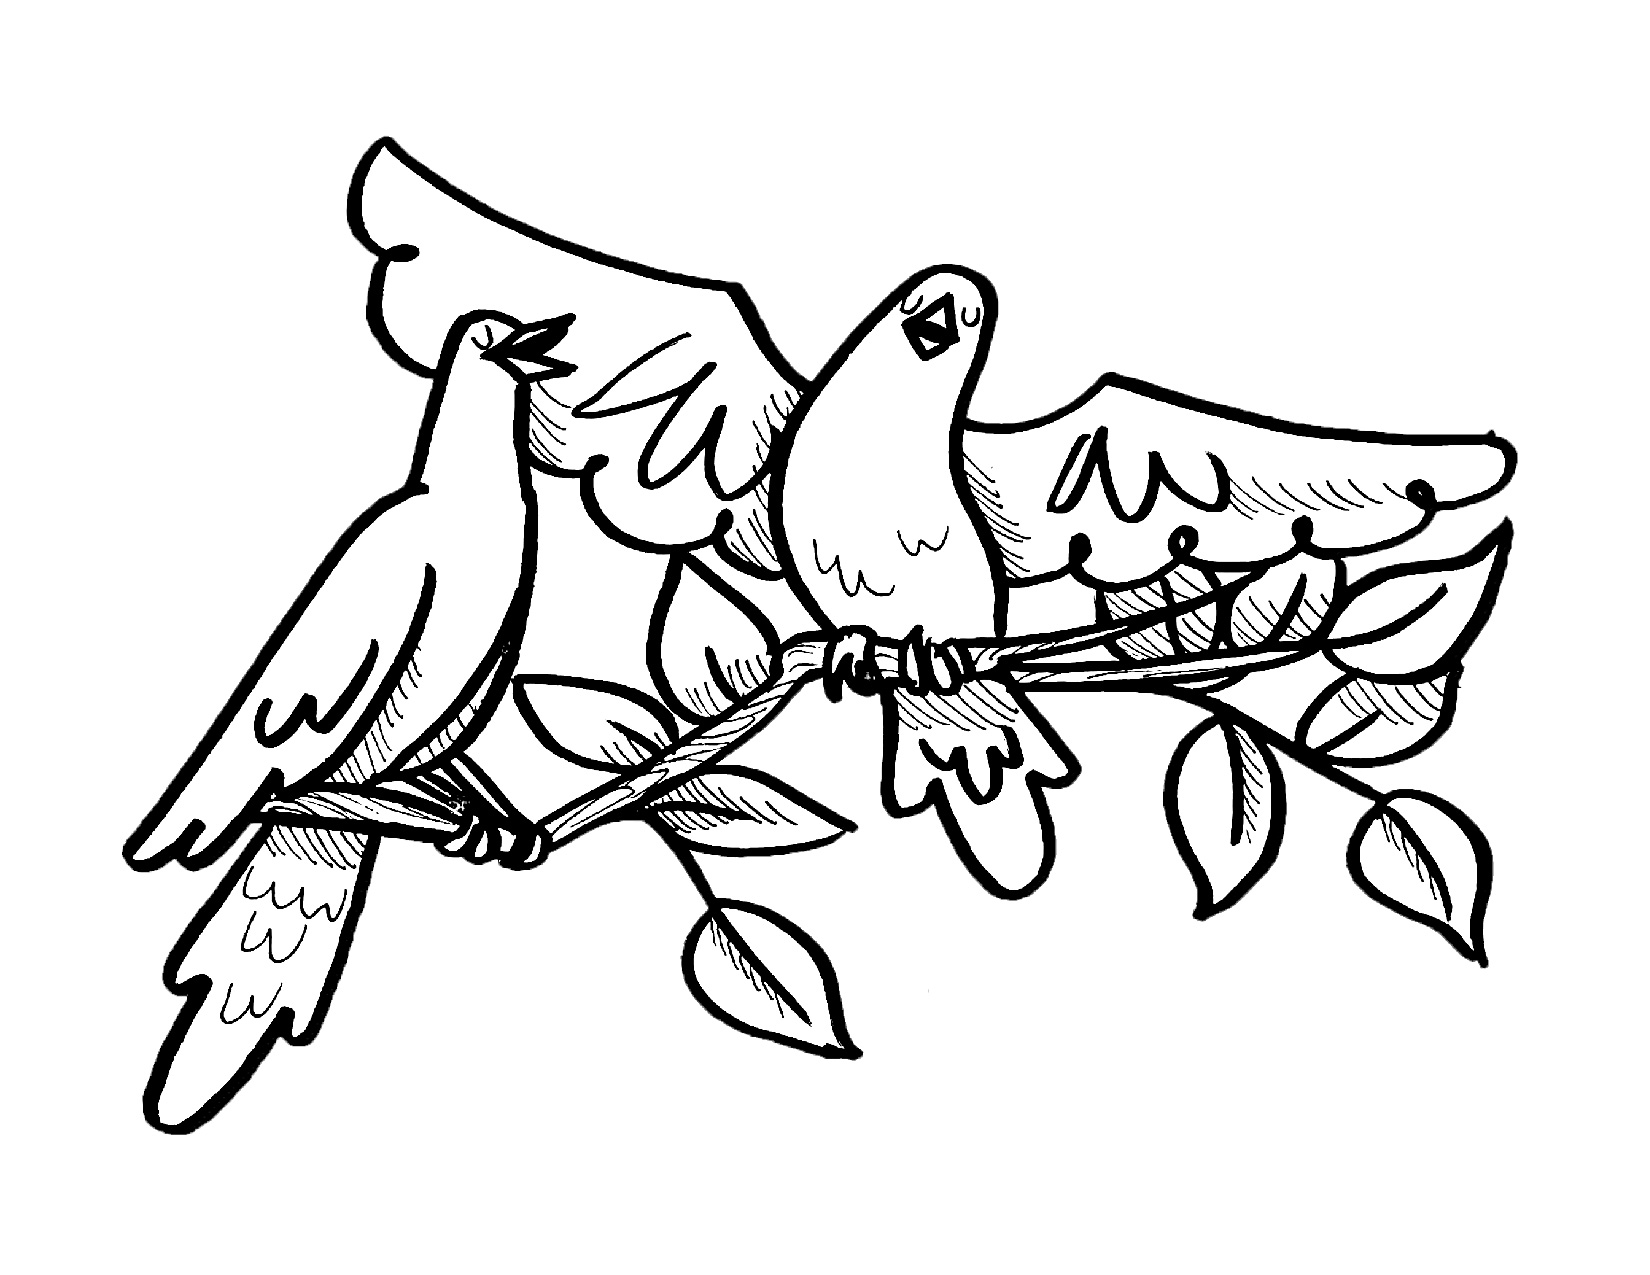 Coloring Page of Birds Singing on a Branch